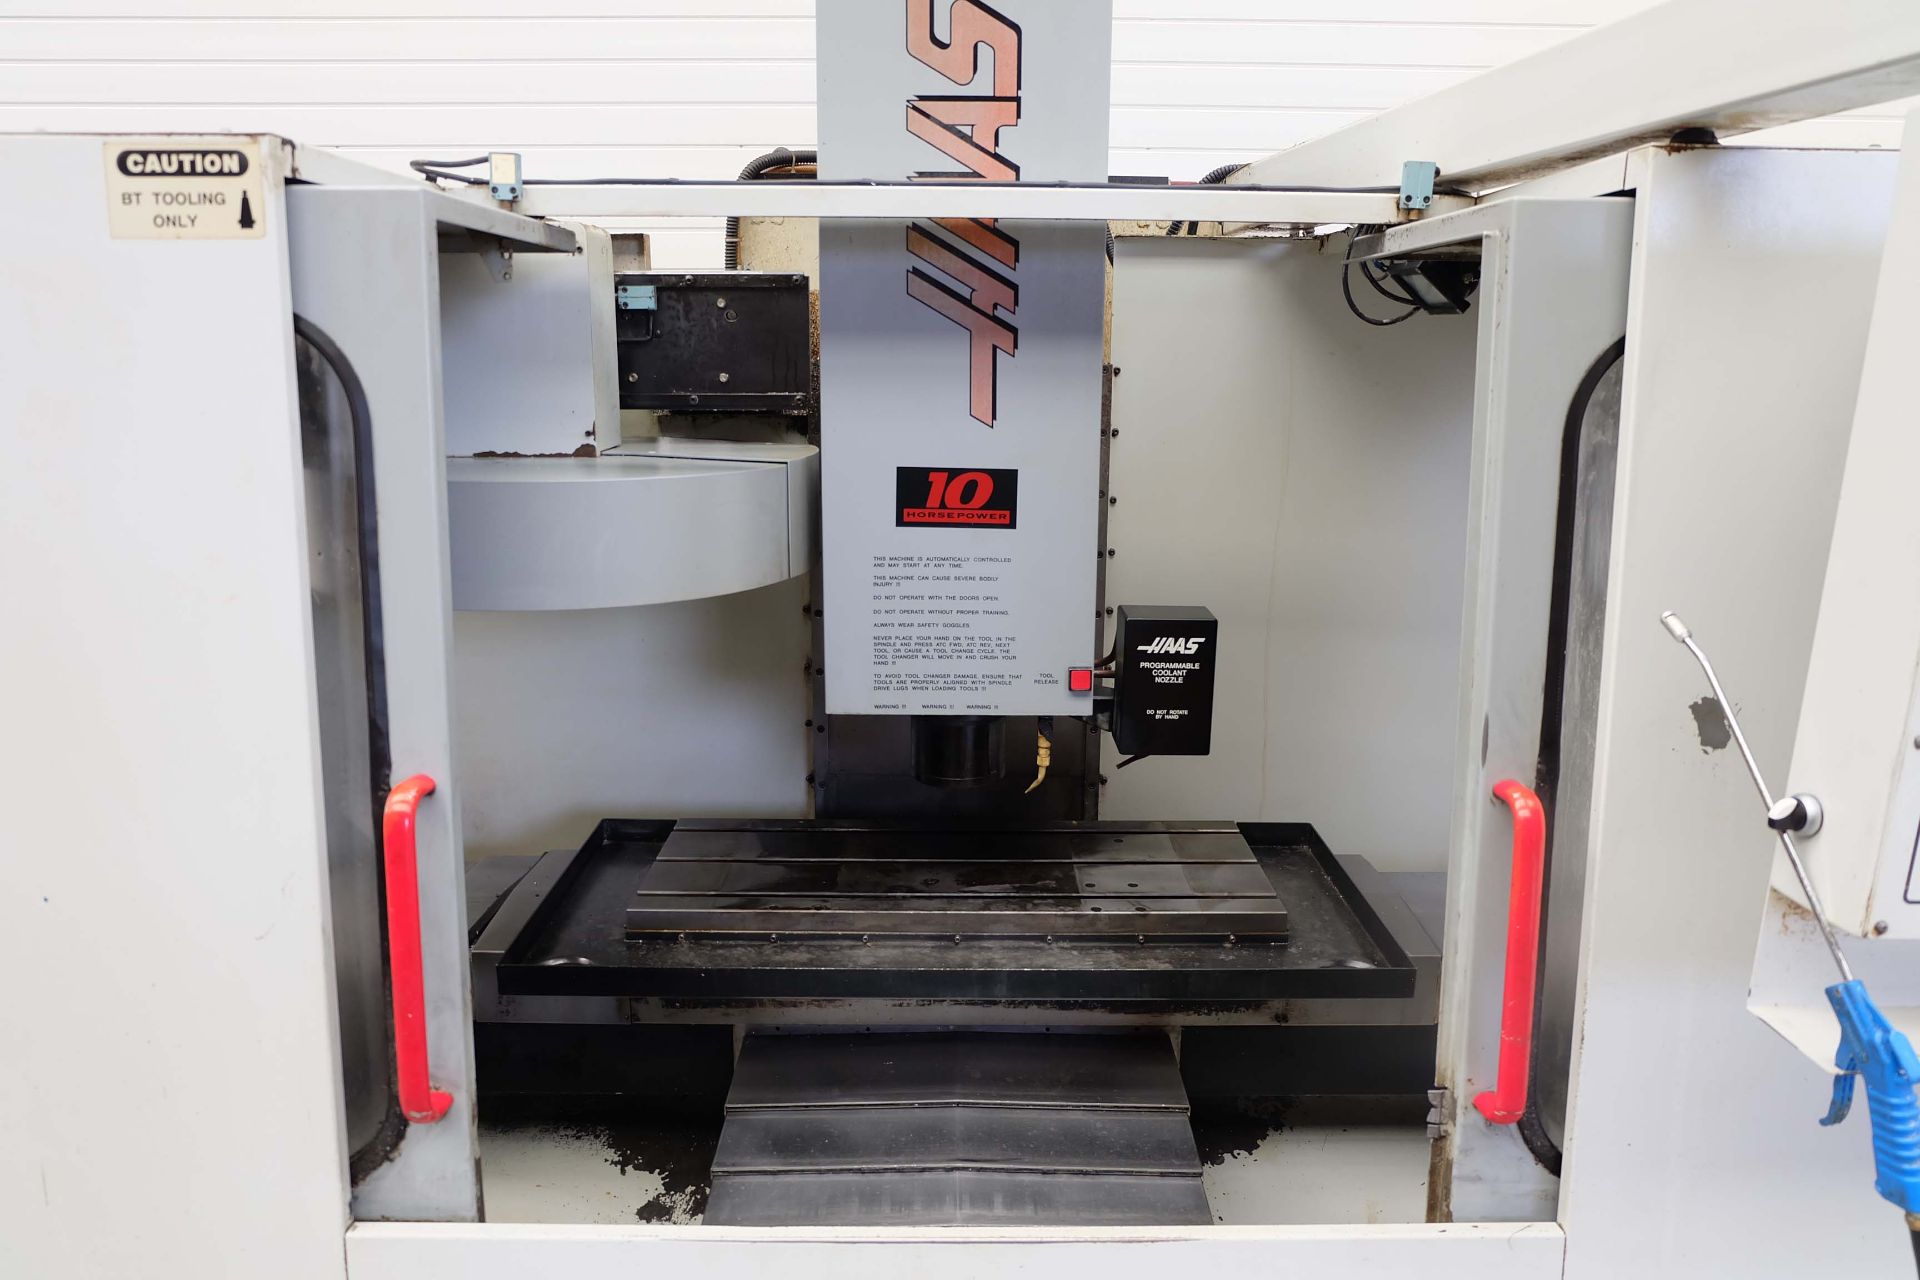 HAAS Model 2 Three Axis Vertical Maching Centre With 20 Station Auto Tool Changer. - Image 3 of 12